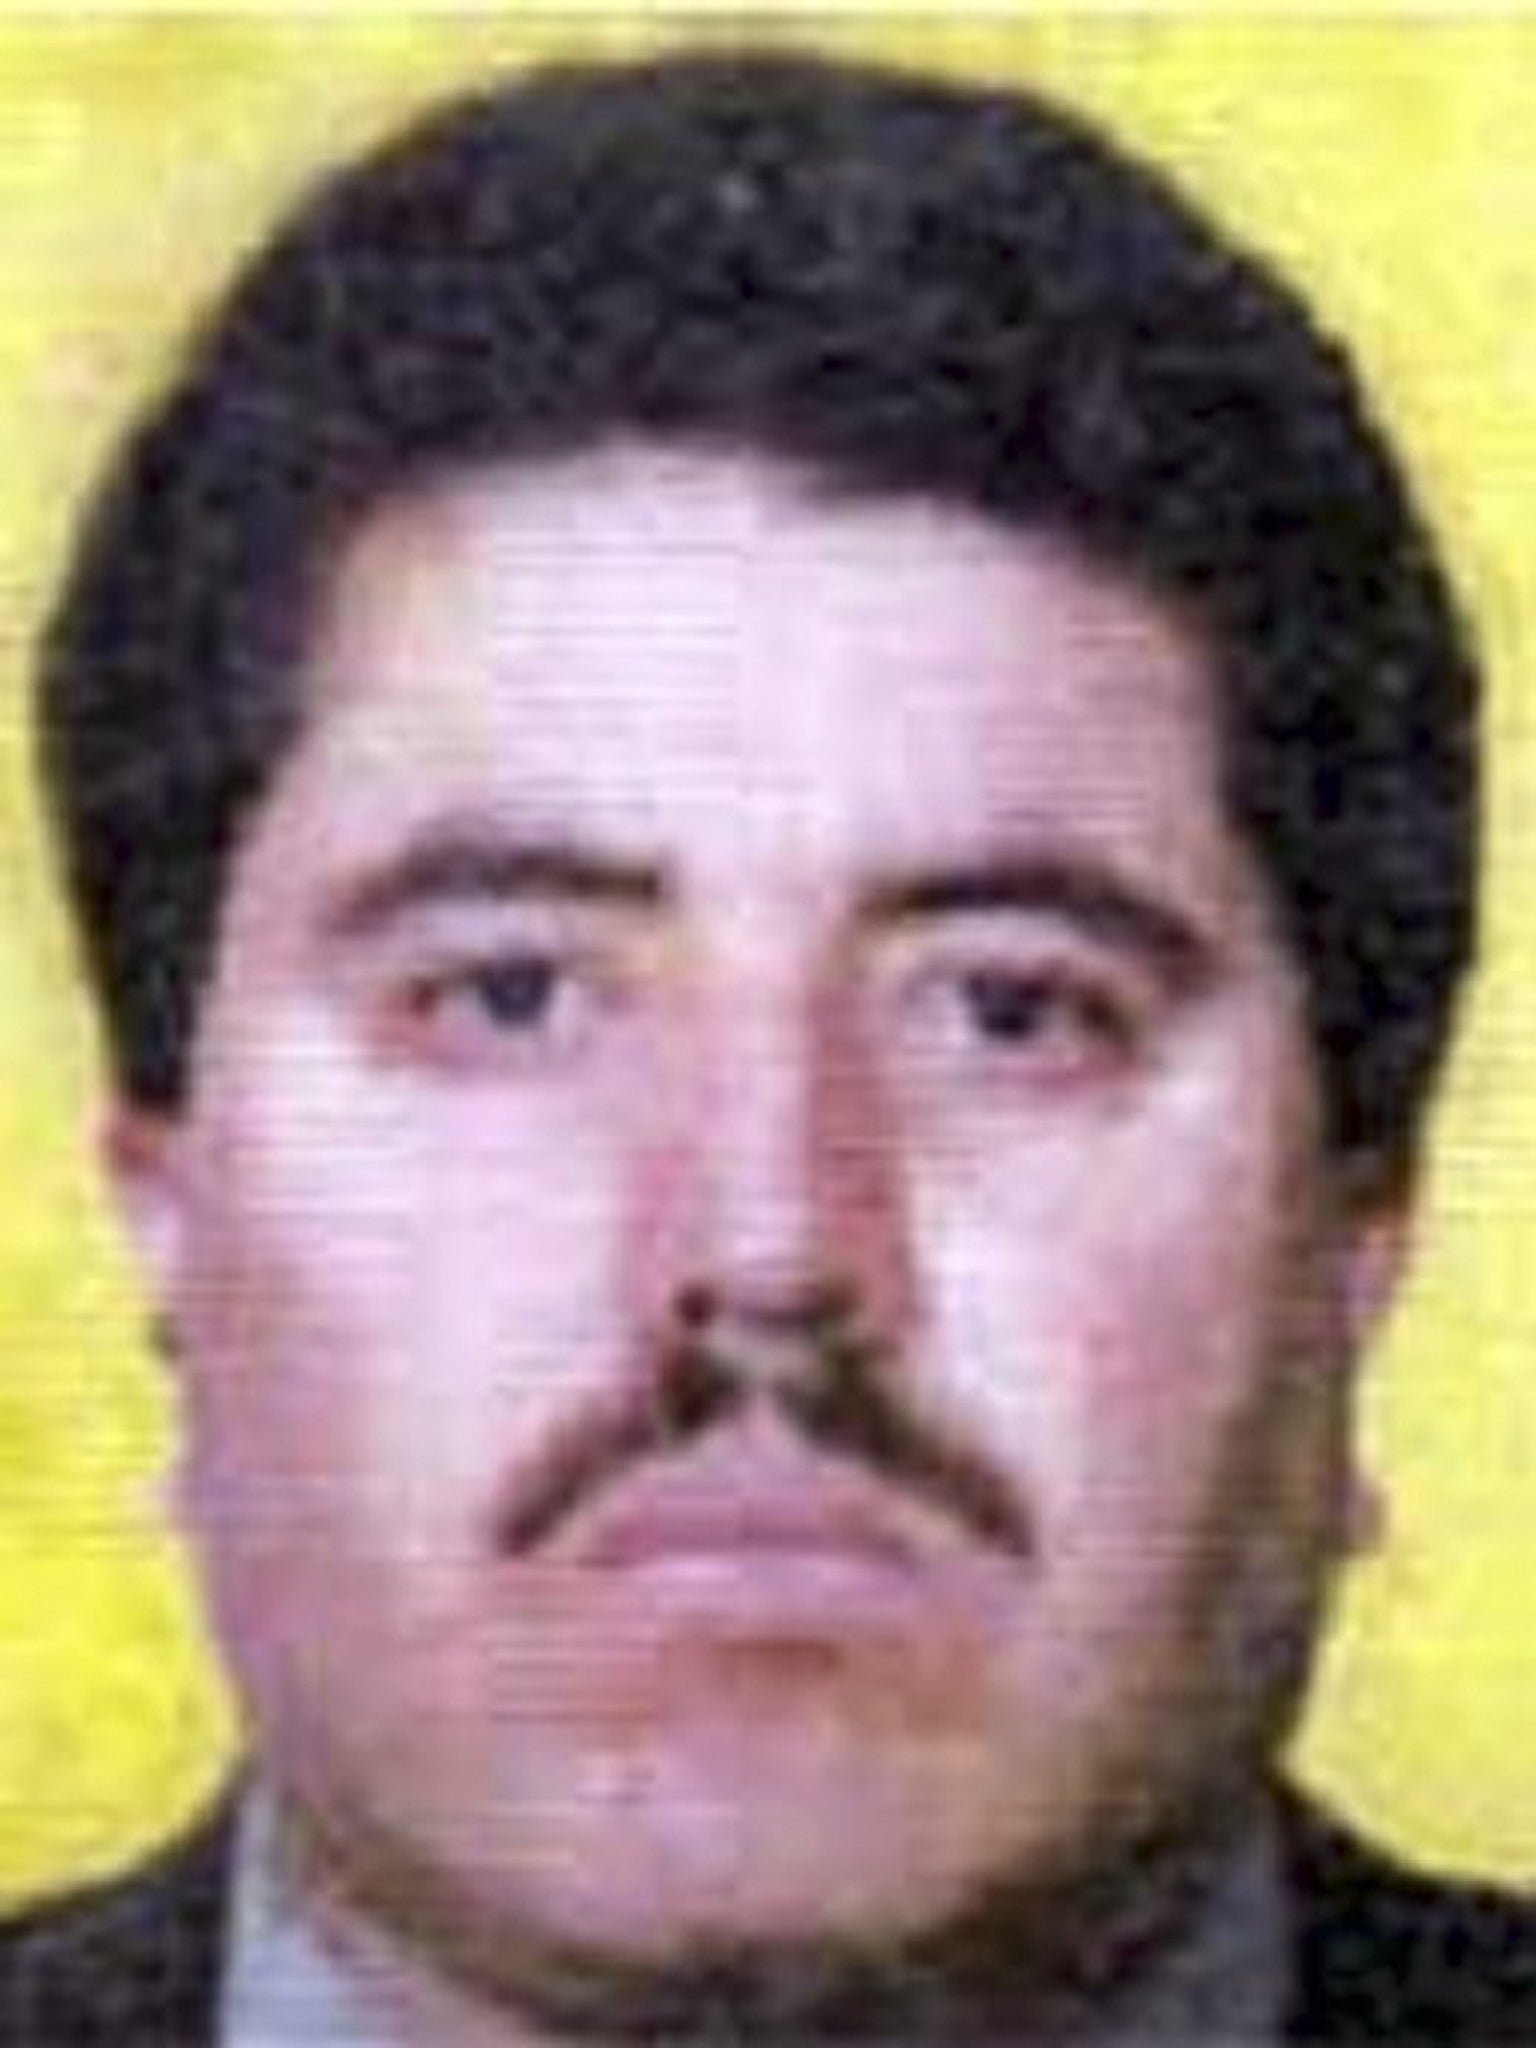 Carrillo Fuentes oversaw the bloody war over trafficking routes with rivals from the Sinaloa cartel that cost at least 8,000 lives